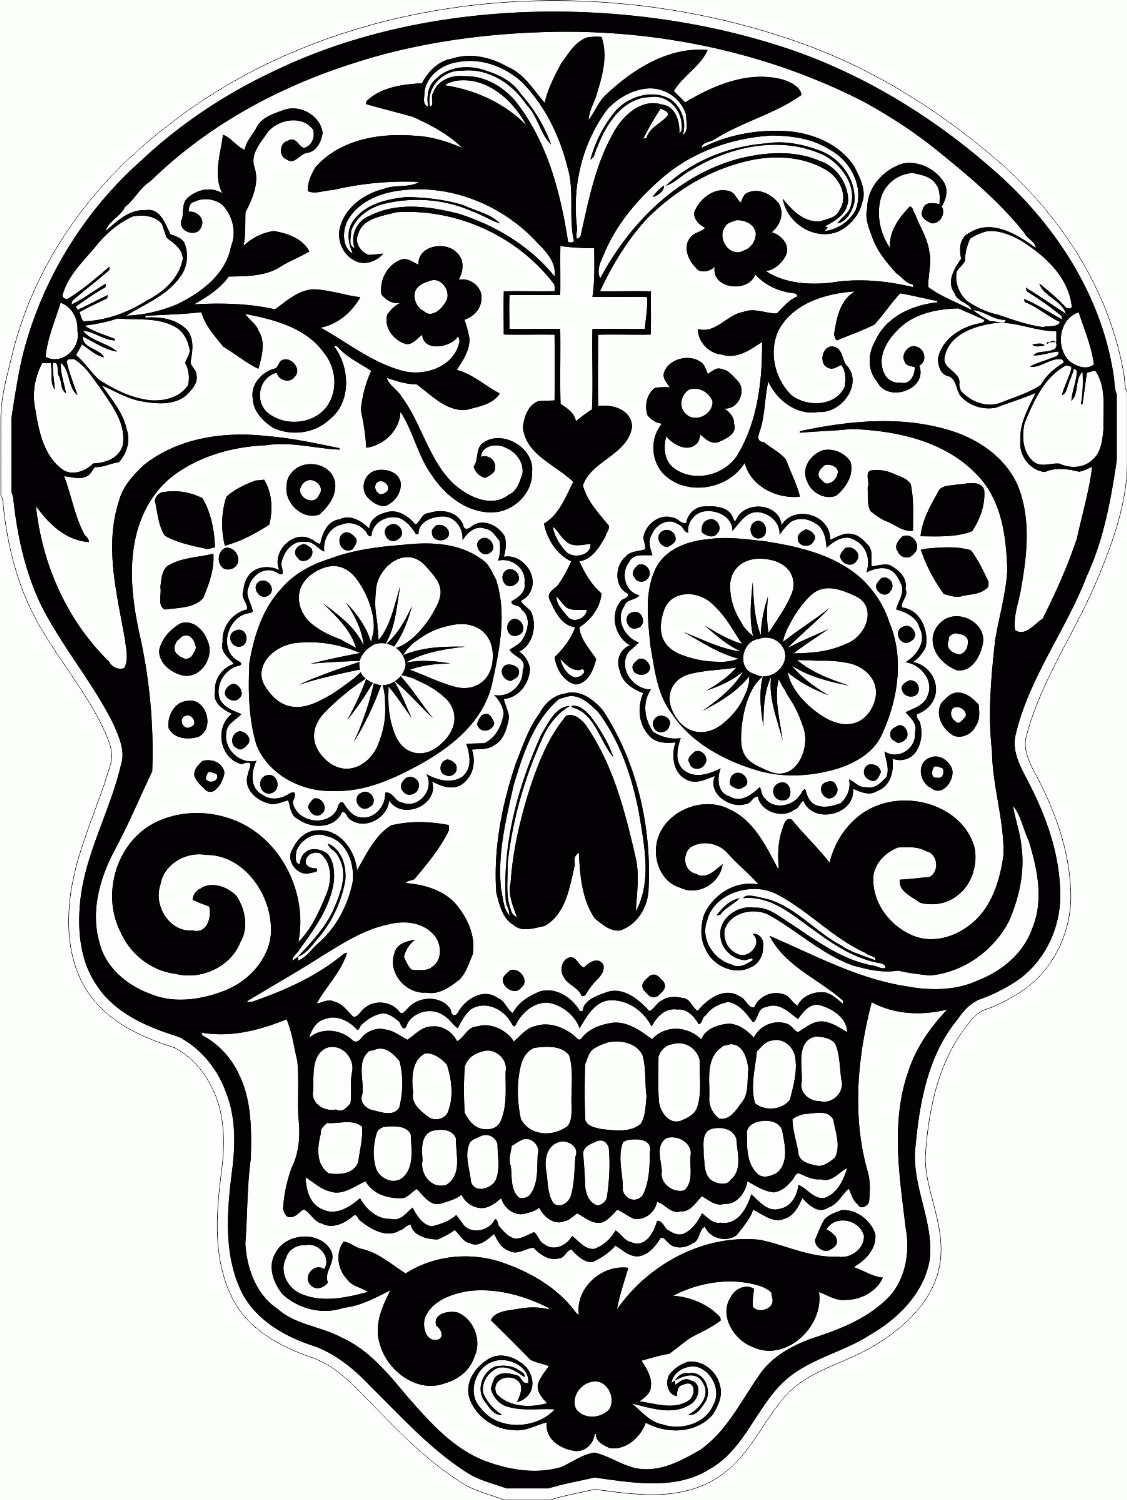 Sugar Skull Coloring Pages To Print - High Quality Coloring Pages